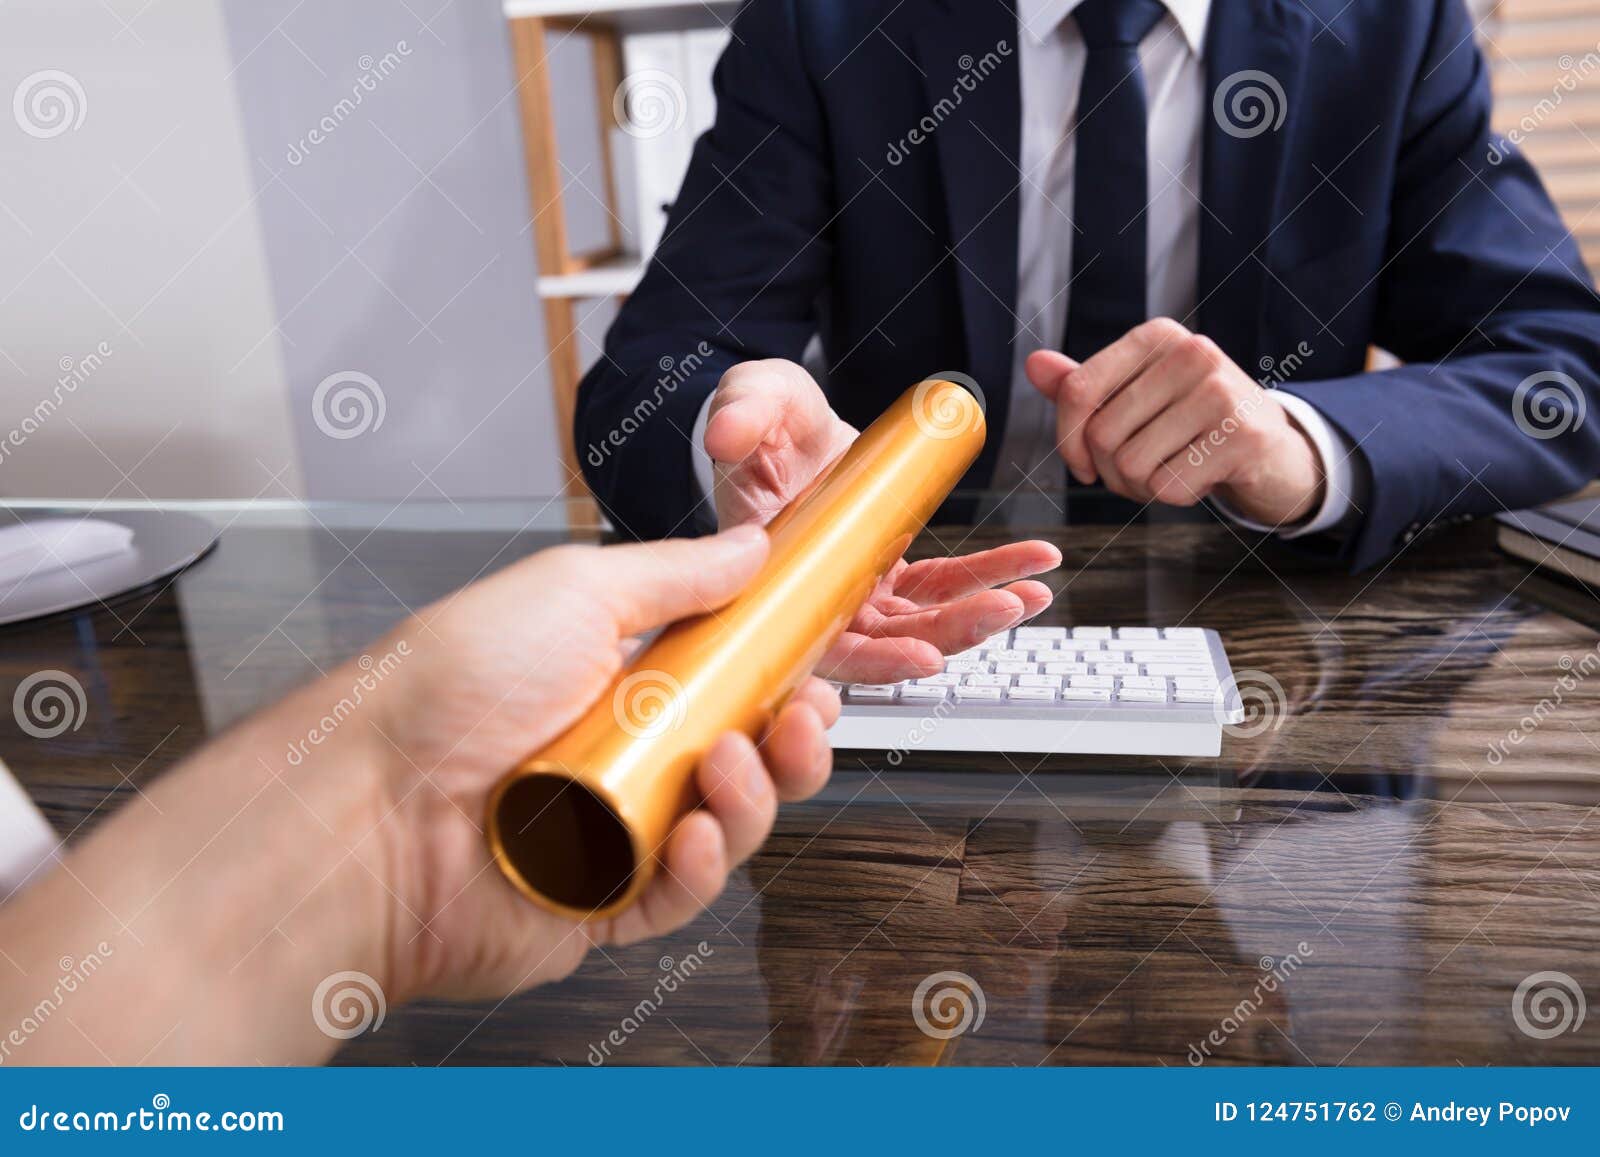 person passing baton to businessperson